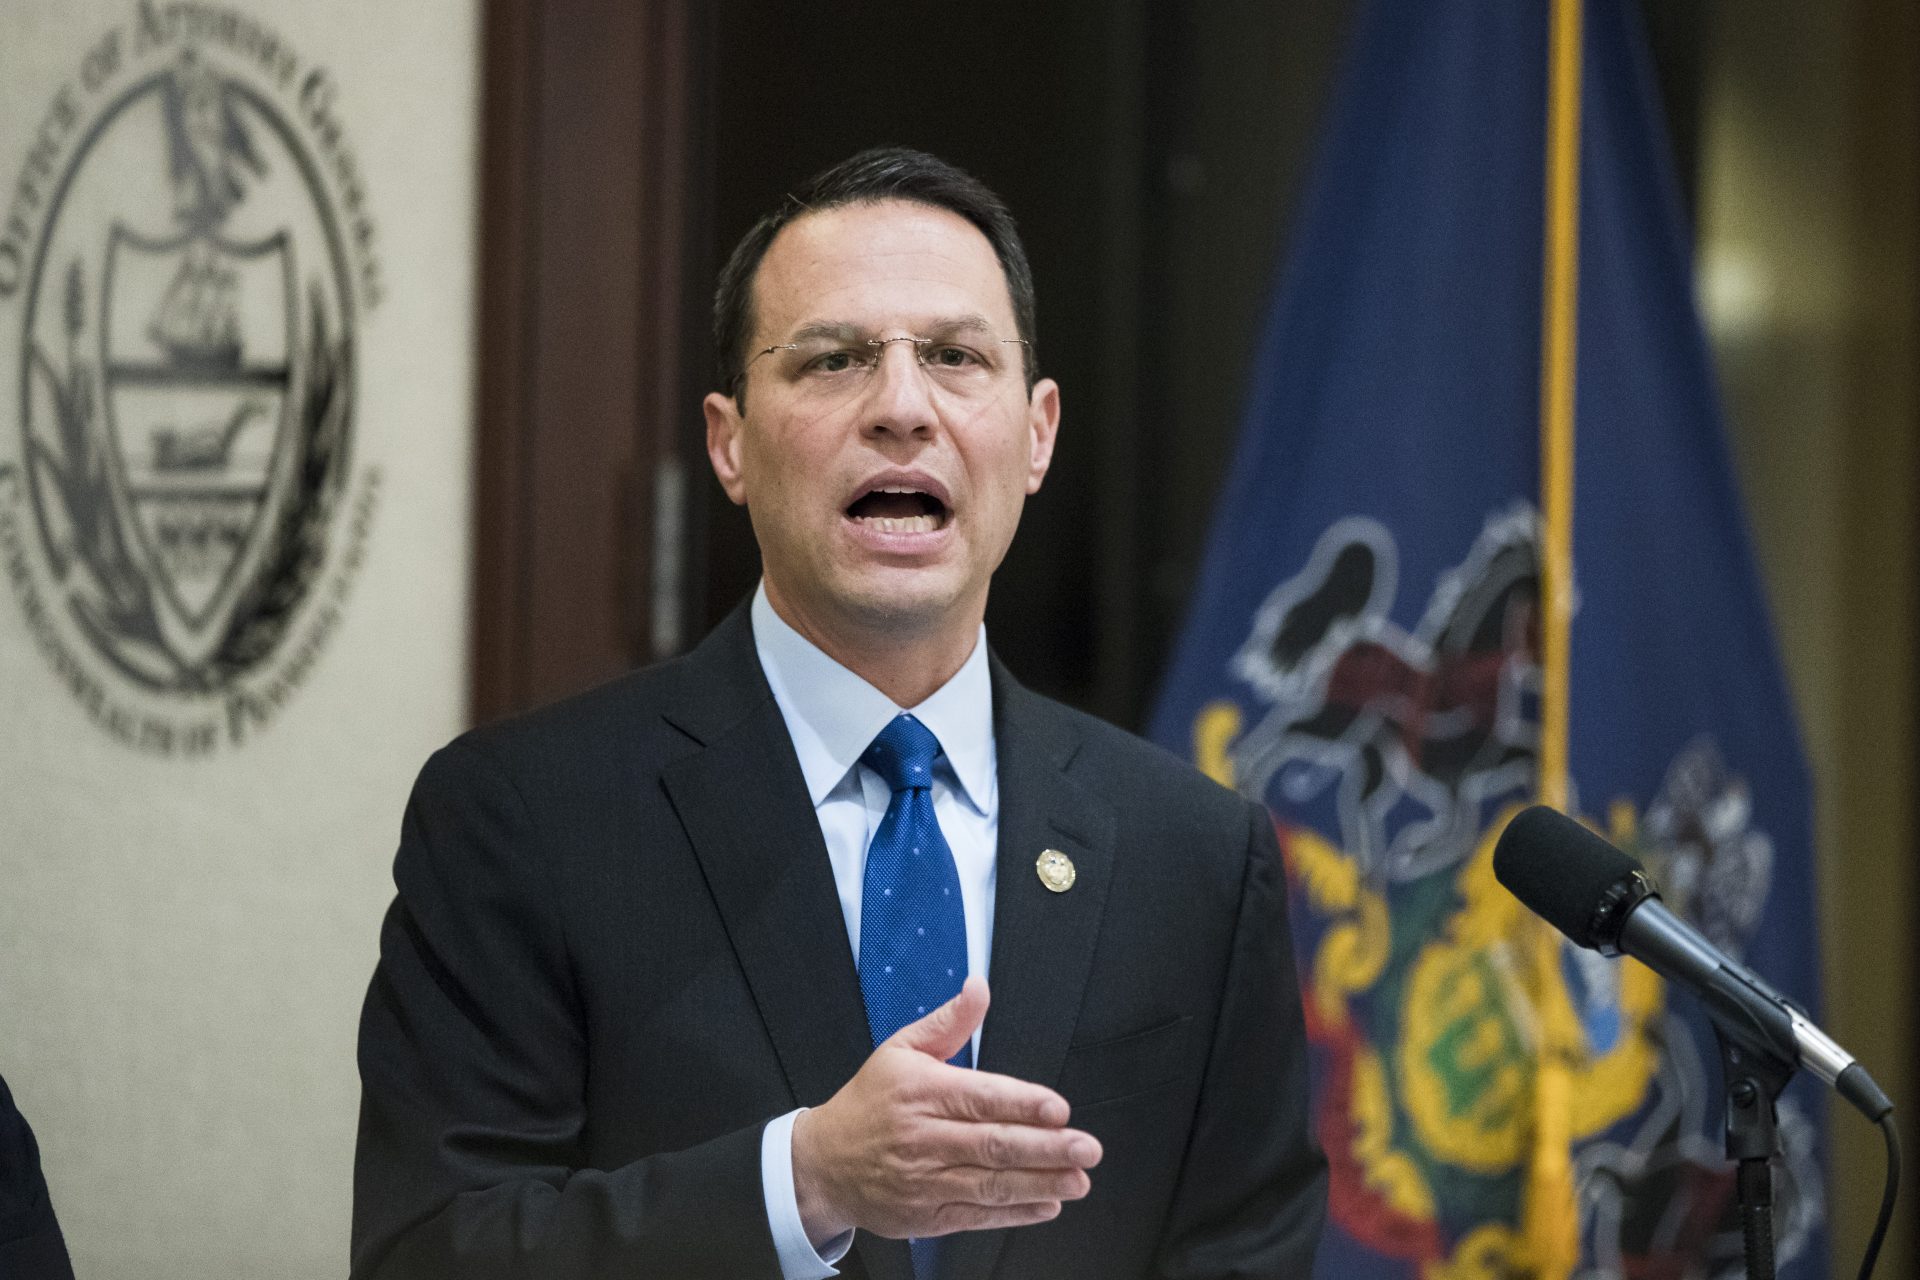 Pennsylvania Attorney General Josh Shapiro speaks during a news conference in Philadelphia, Tuesday, May 14, 2019.